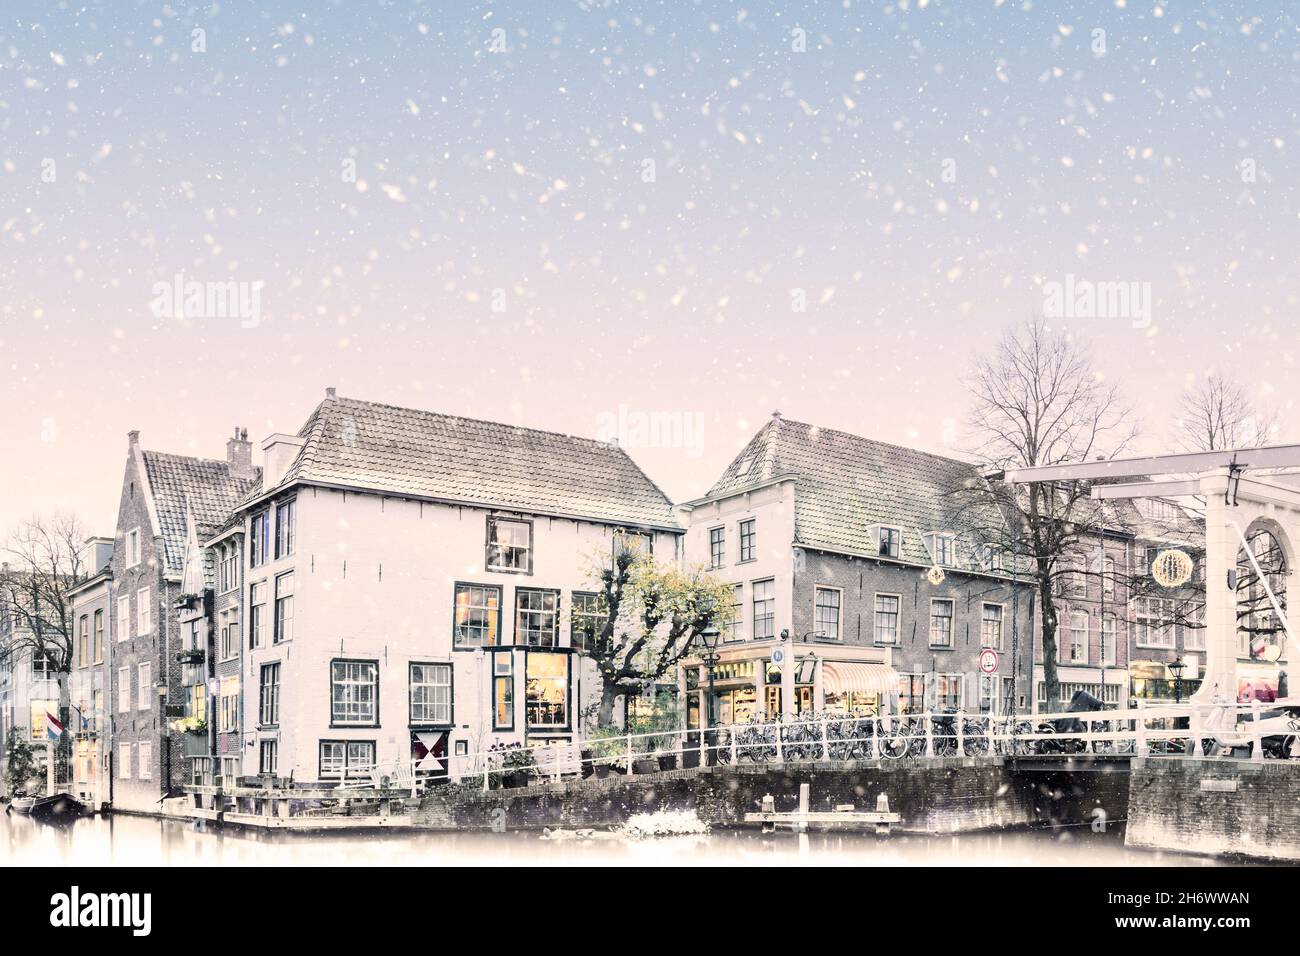 Winter view of the Dutch city center of Alkmaar with canal, bridge and shopping stores in The Netherlands Stock Photo